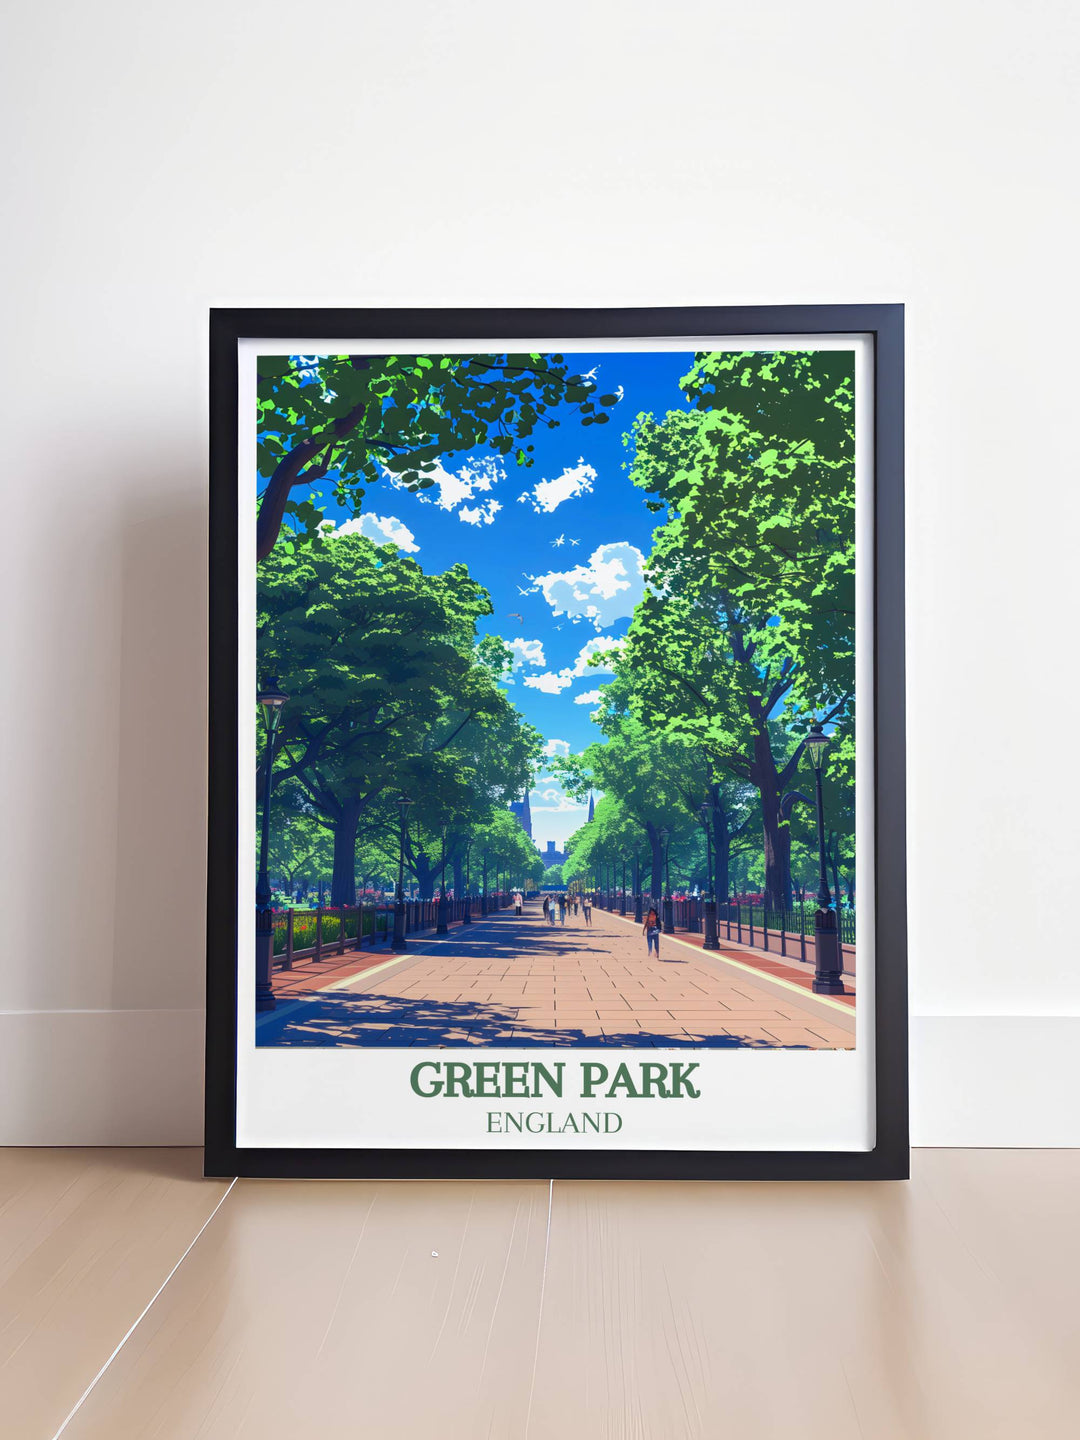 Elegant framed print showcasing Green Park London and the Princess of Wales Memorial Walk, capturing the serene beauty and historical significance of this beloved location.